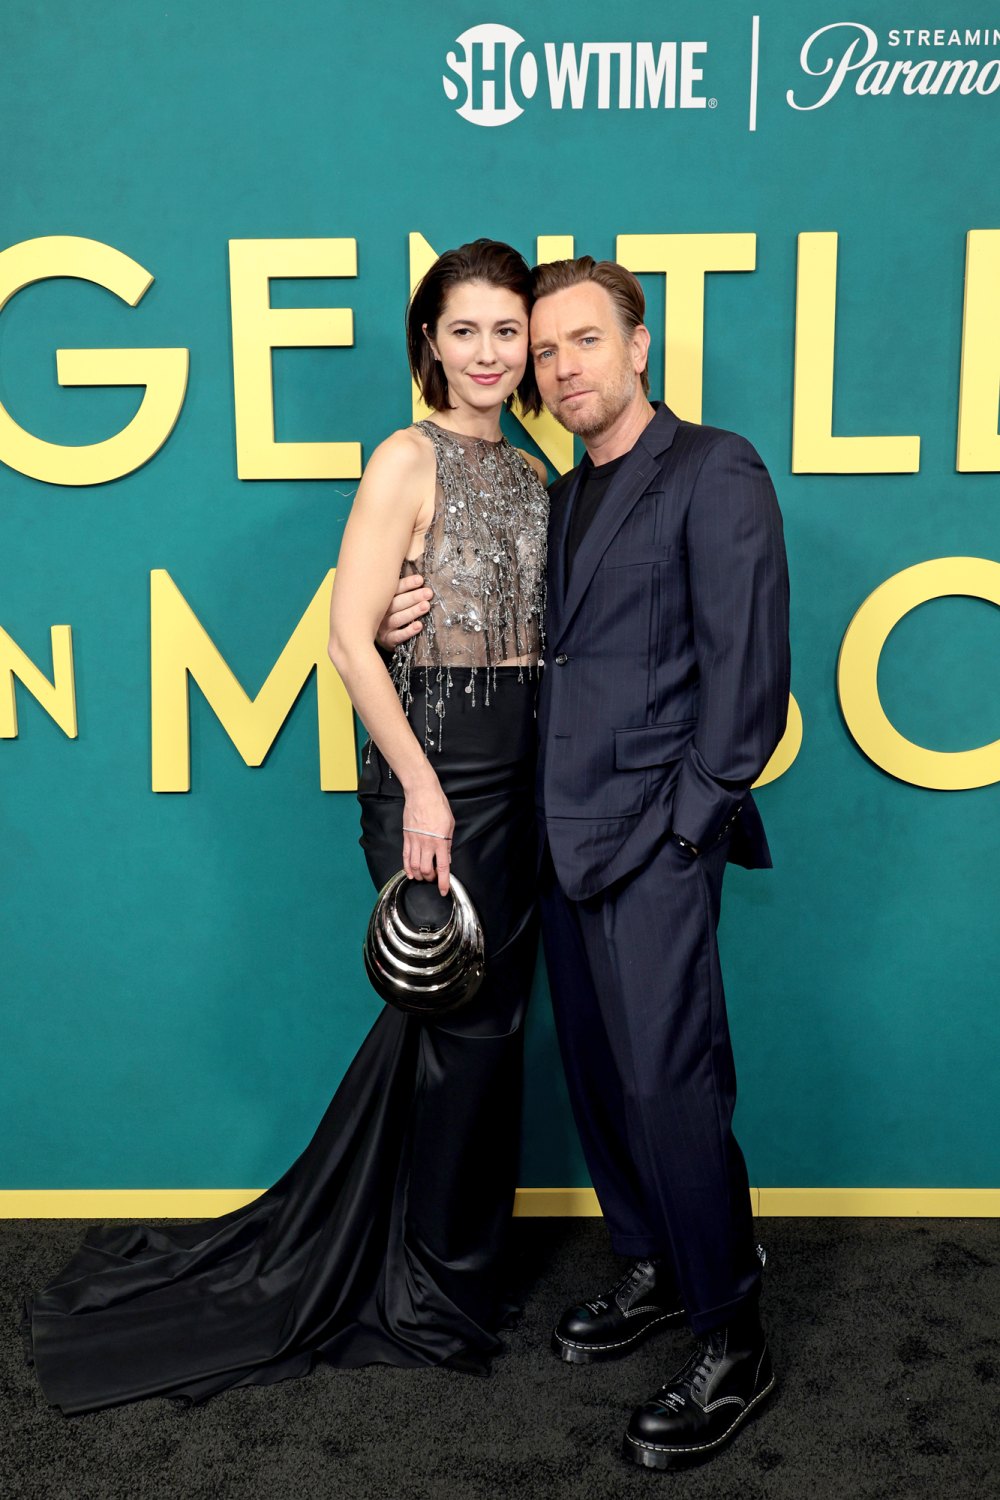 Ewan McGregor Says He and Wife Mary Elizabeth Winstead Use an Intimacy Coordinator for Sex Scenes